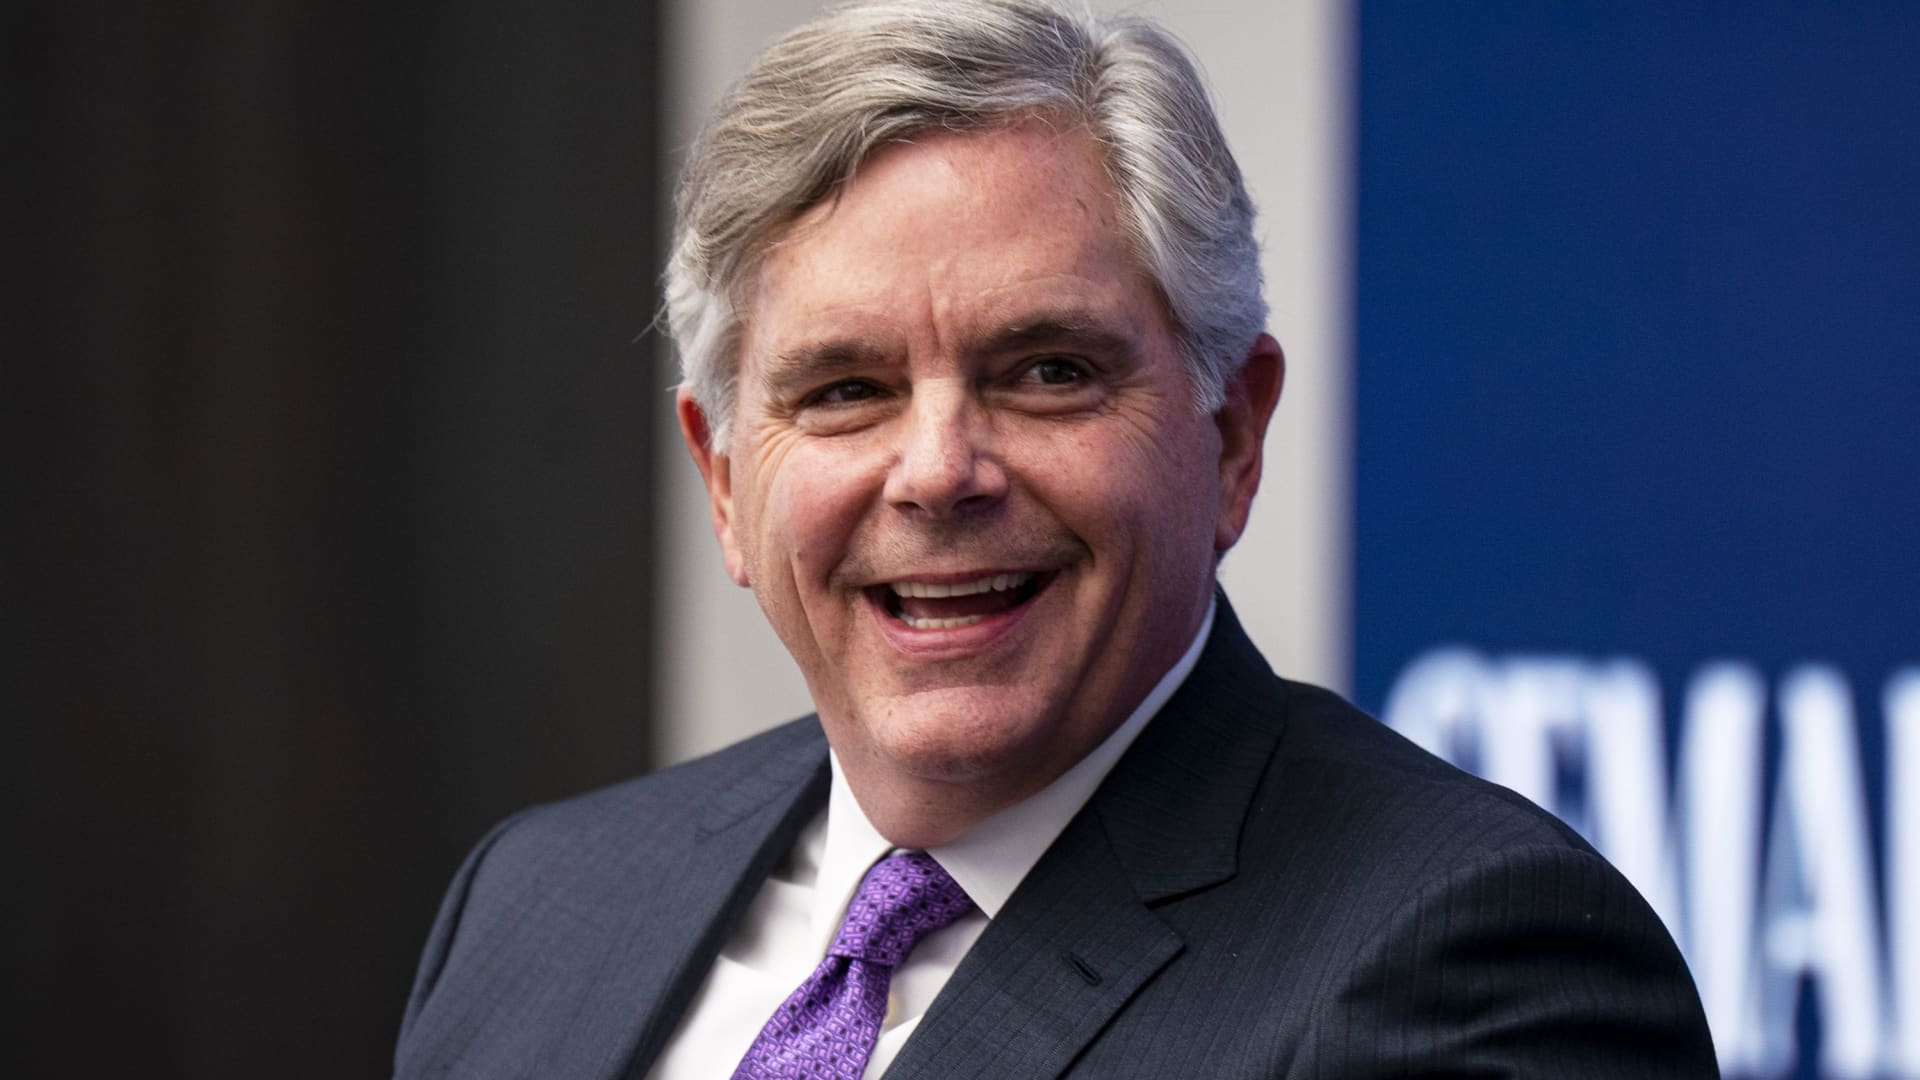 Larry Culp, chairman and chief executive officer of General Electric Co., speaks during the Semafor World Economy Summit in Washington, DC, on Wednesday, April 12, 2023.